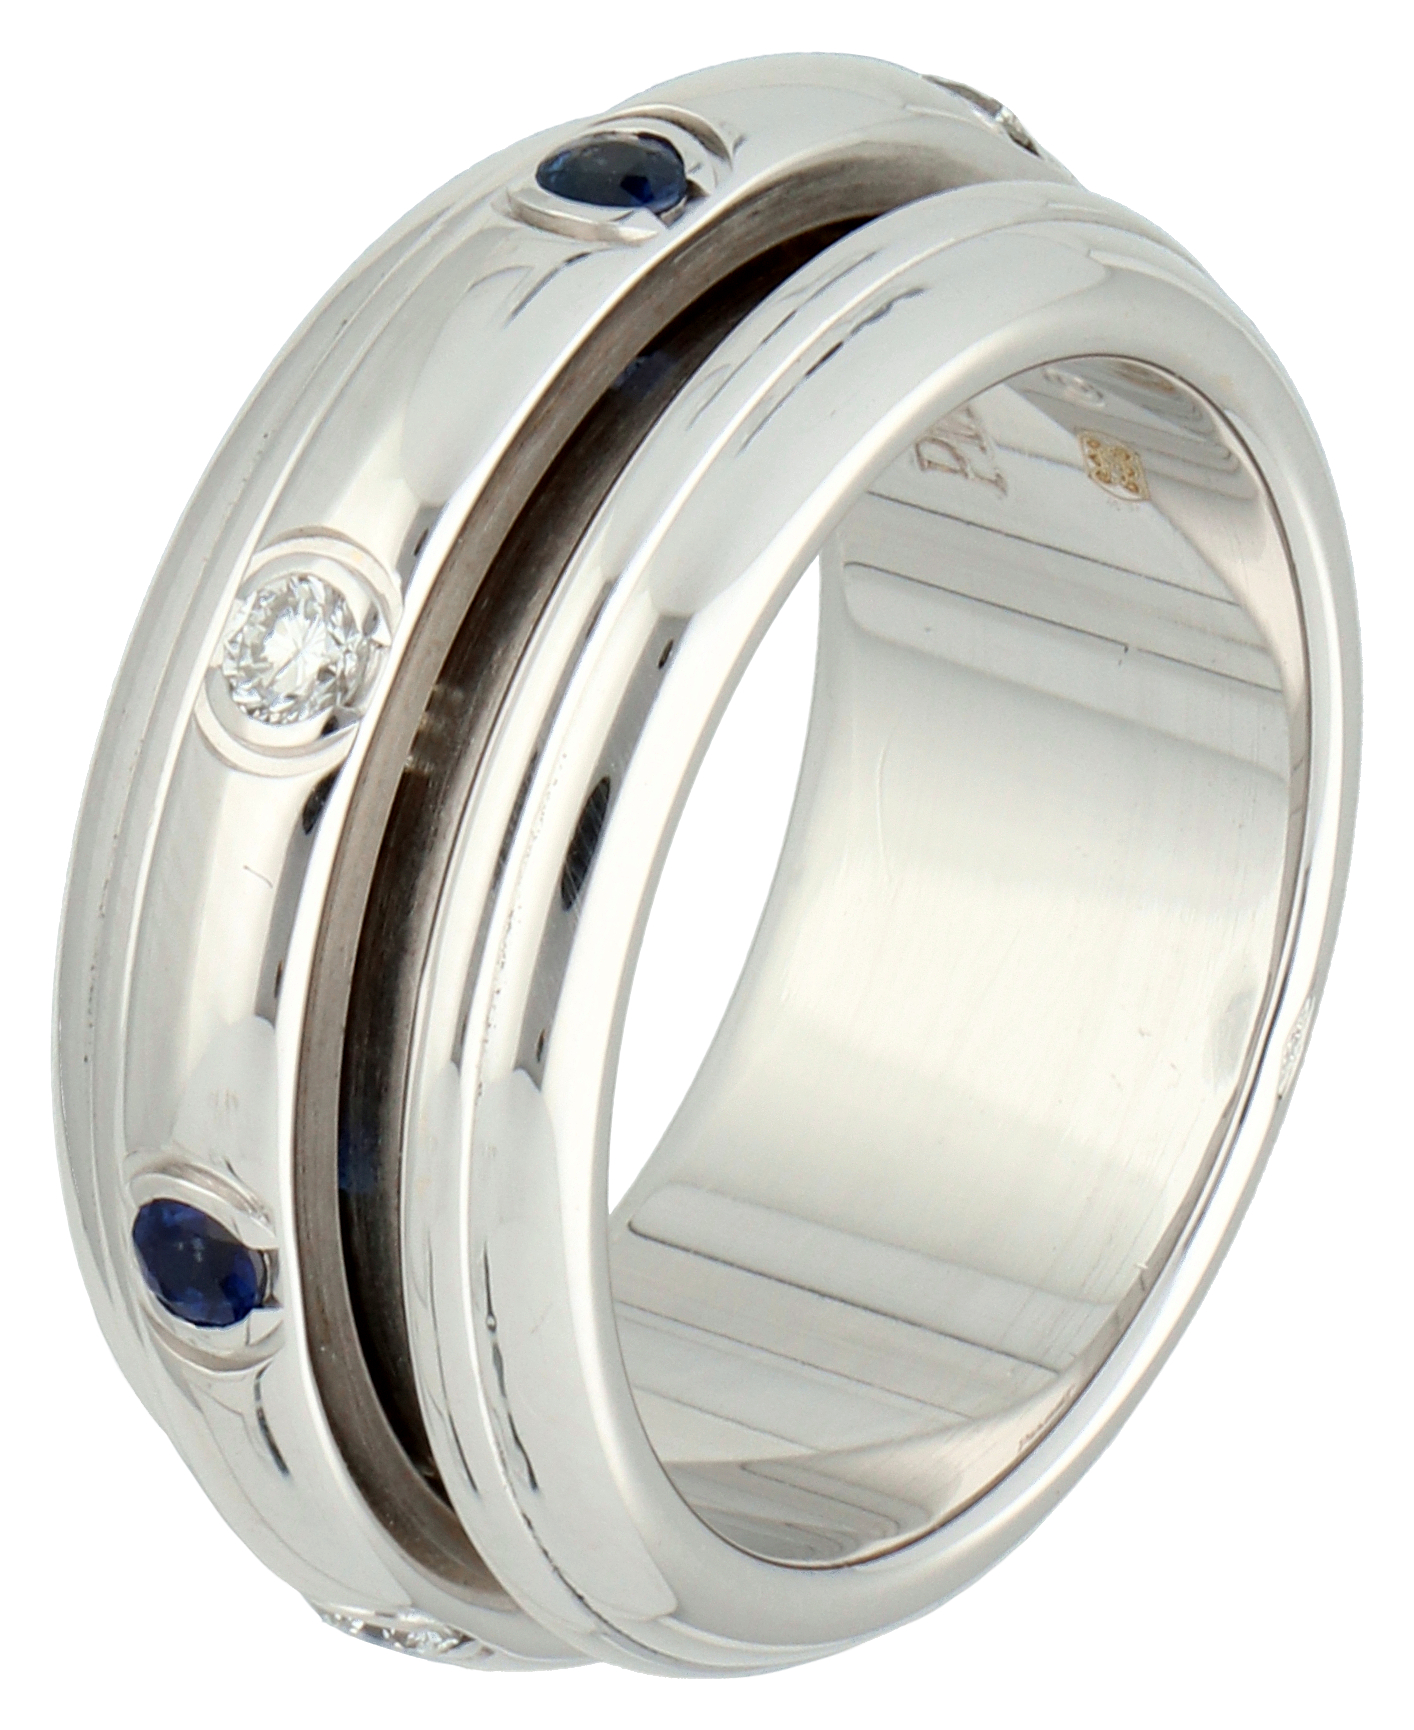 No Reserve - Piaget 18K white gold Possession ring set with diamond and sapphire.